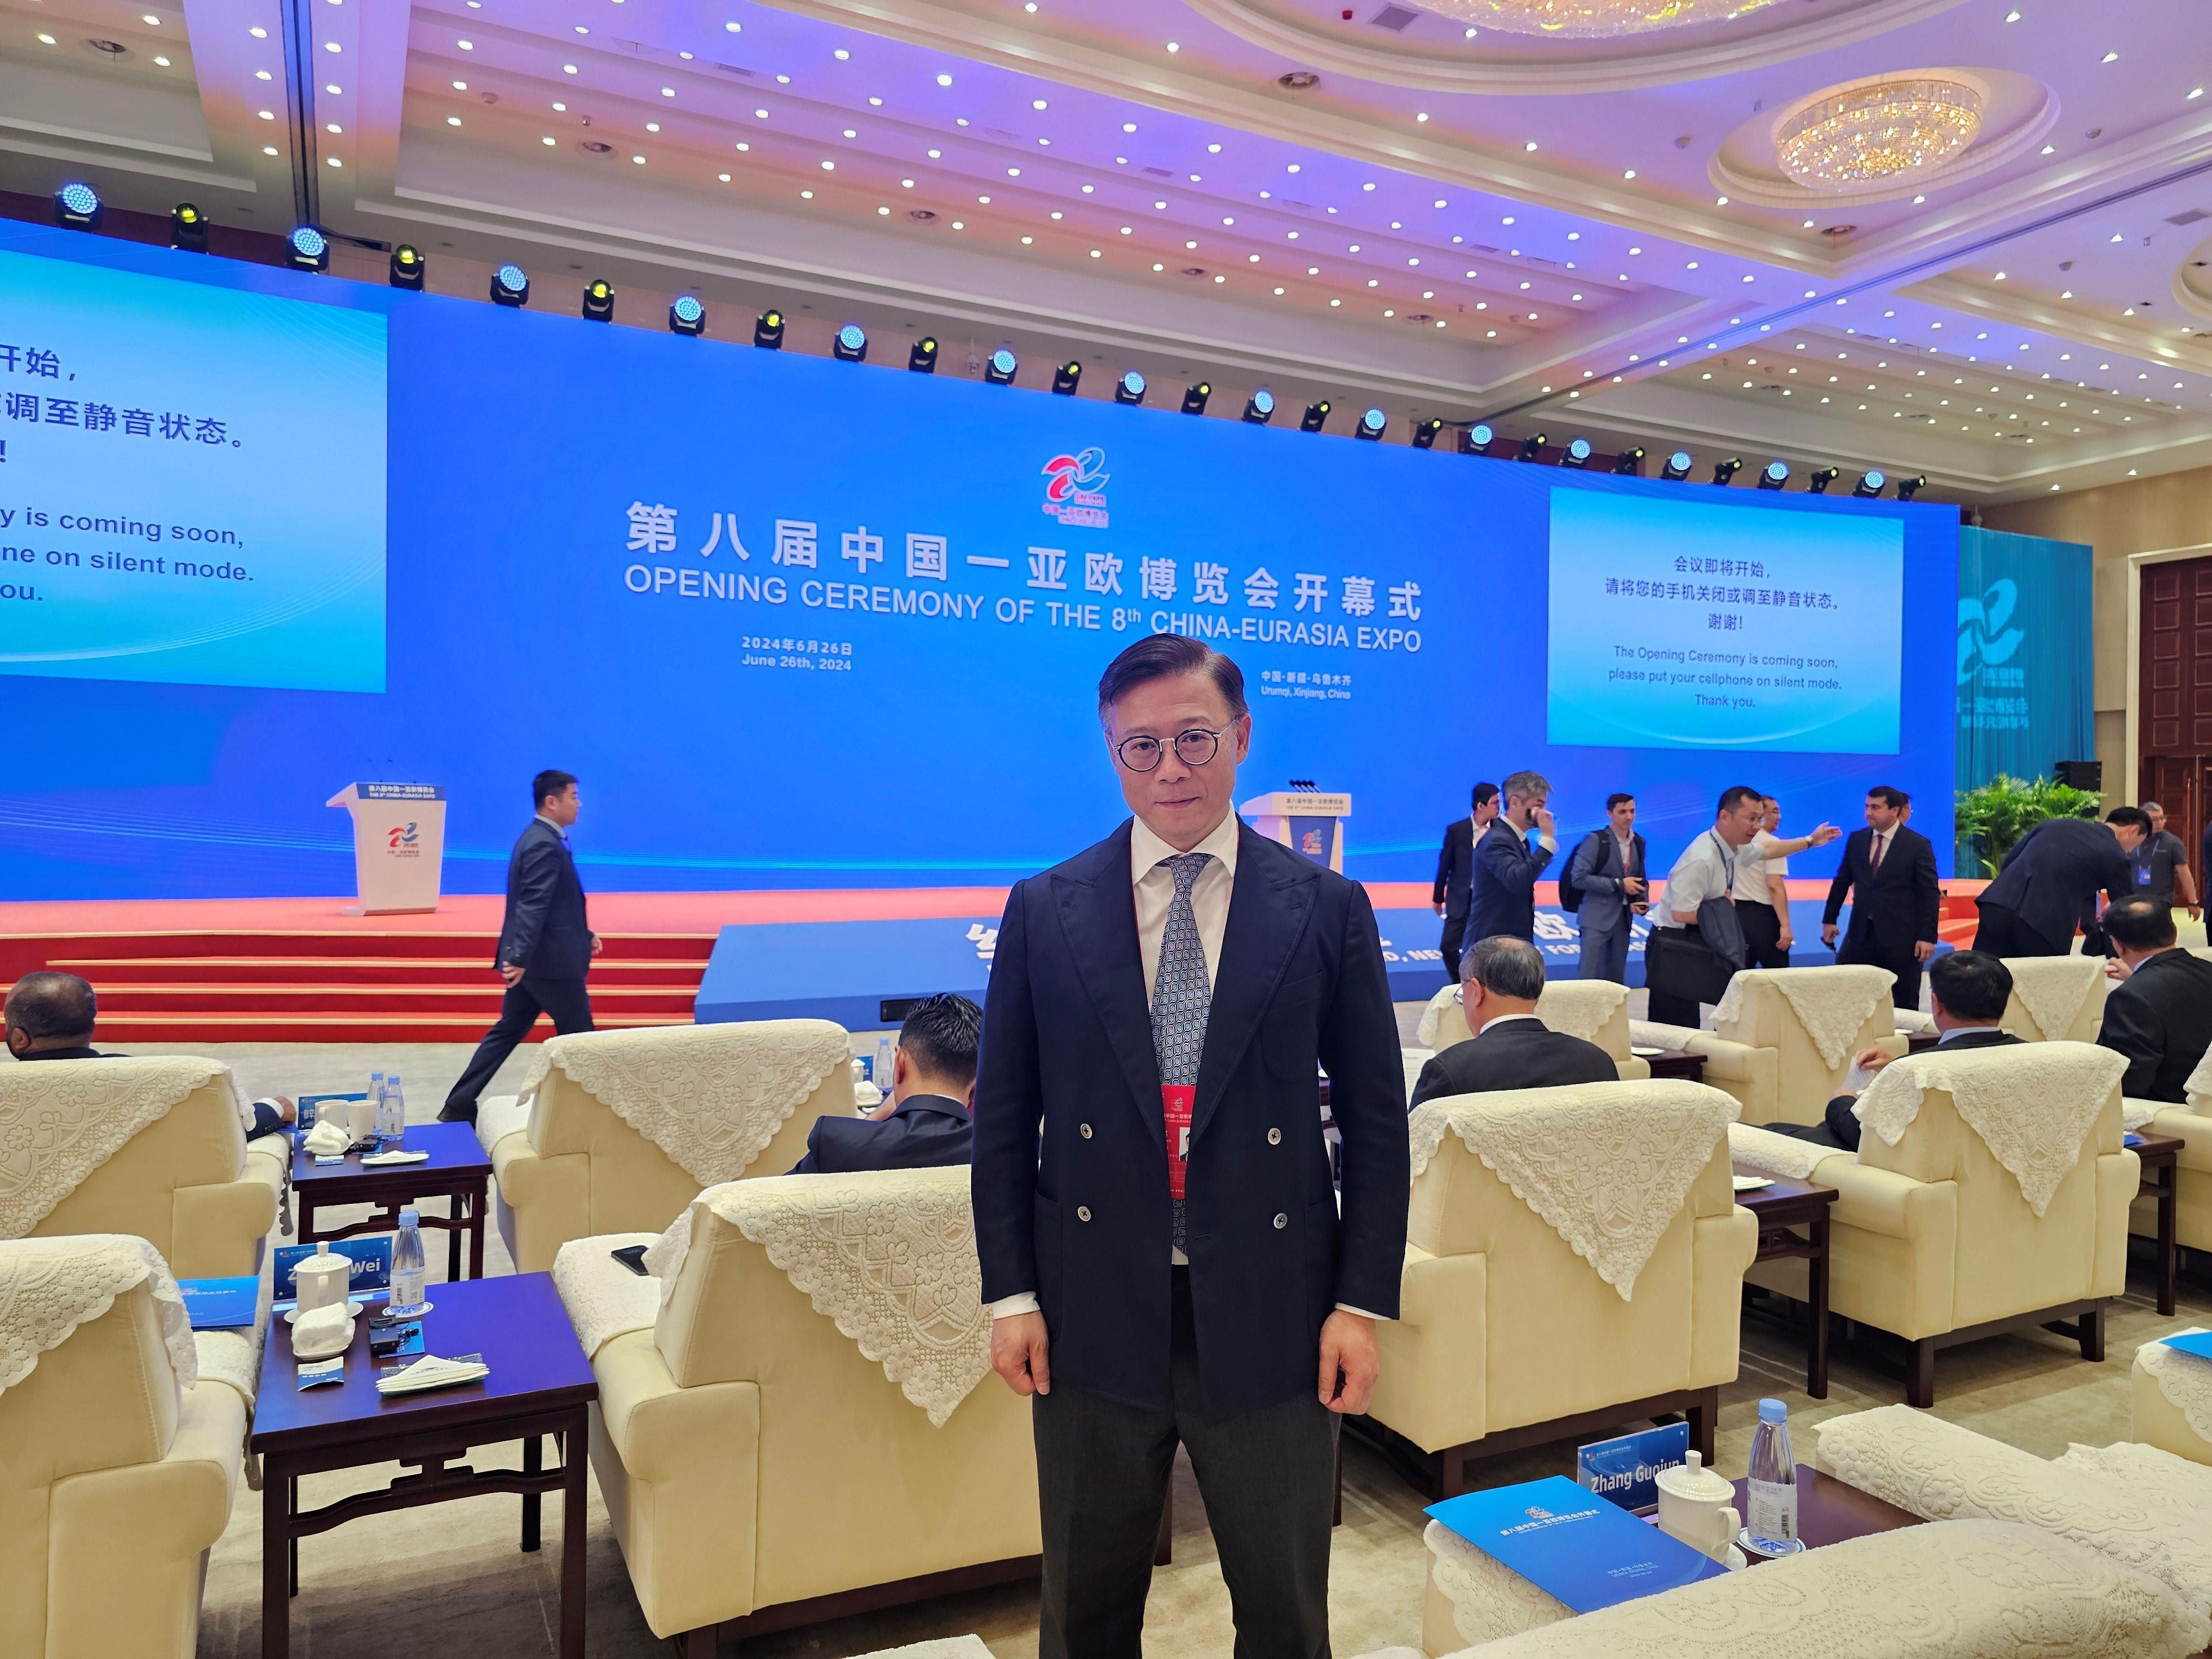 The Deputy Secretary for Justice, Mr Cheung Kwok-kwan, on behalf of the Hong Kong Special Administrative Region Government, today (June 26) attended the 8th China-Eurasia Expo in Urumqi, Xinjiang.